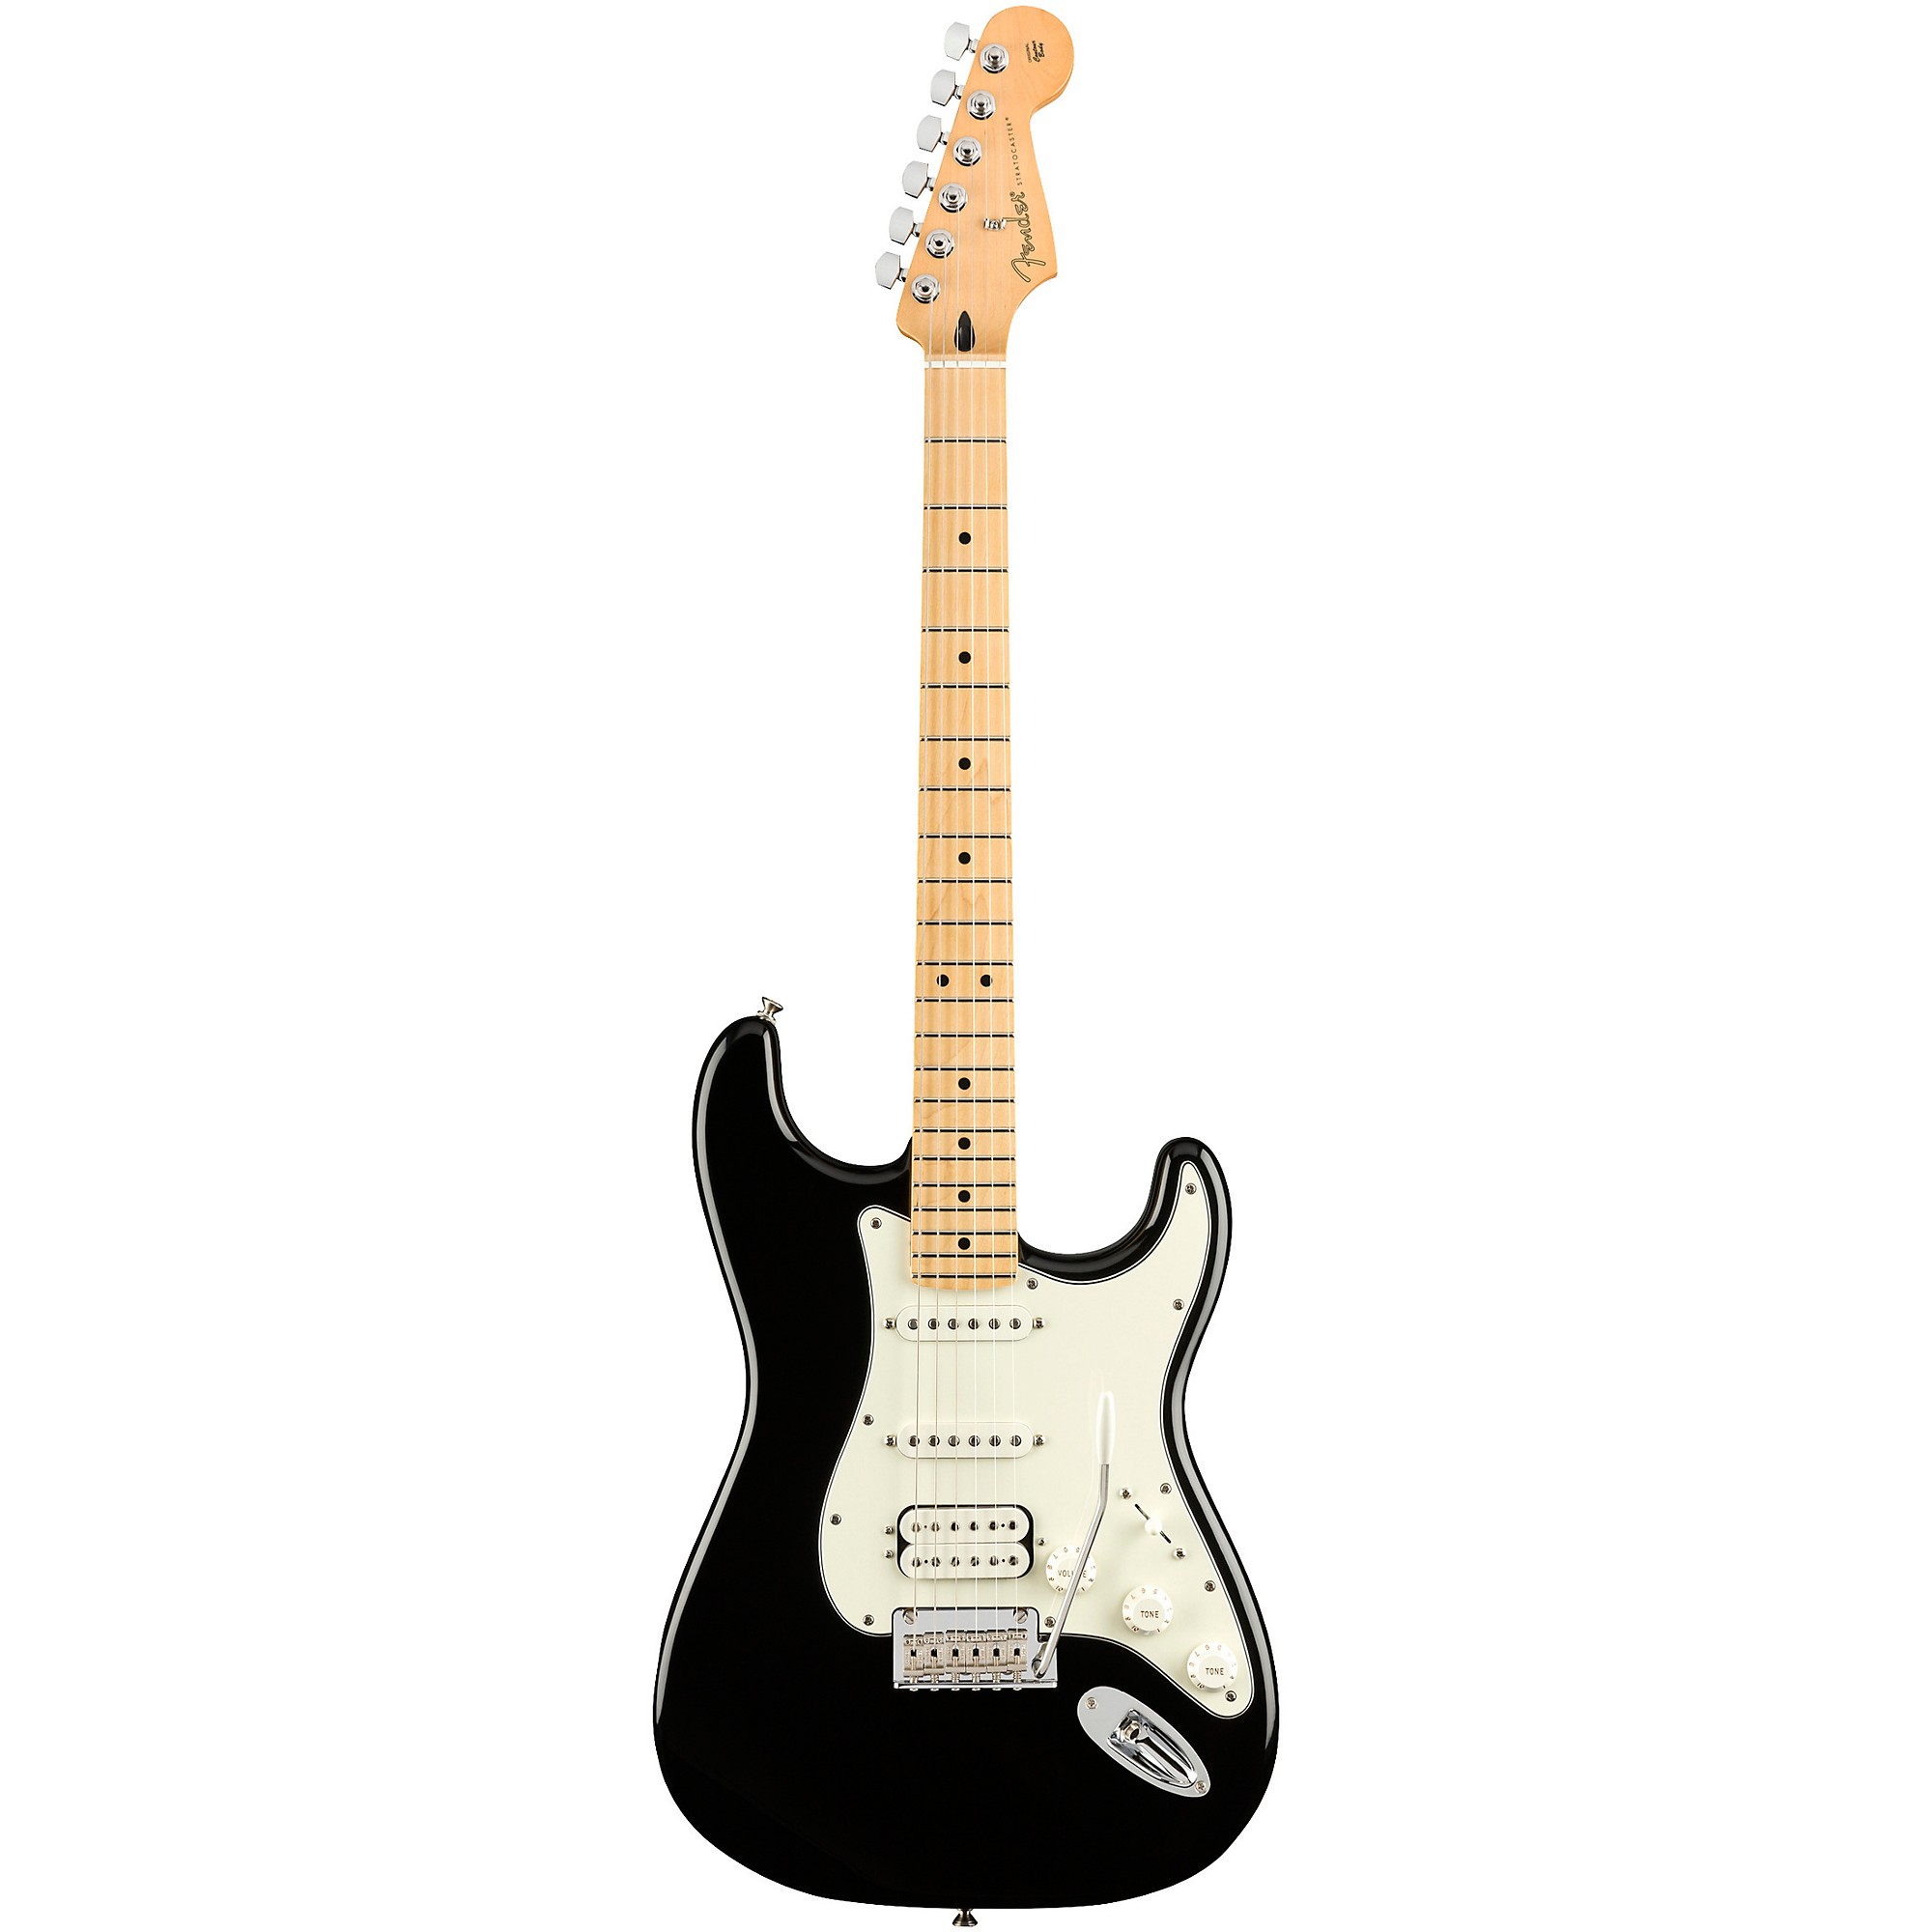 Fender Player Stratocaster HSS Maple Fingerboard Electric Guitar